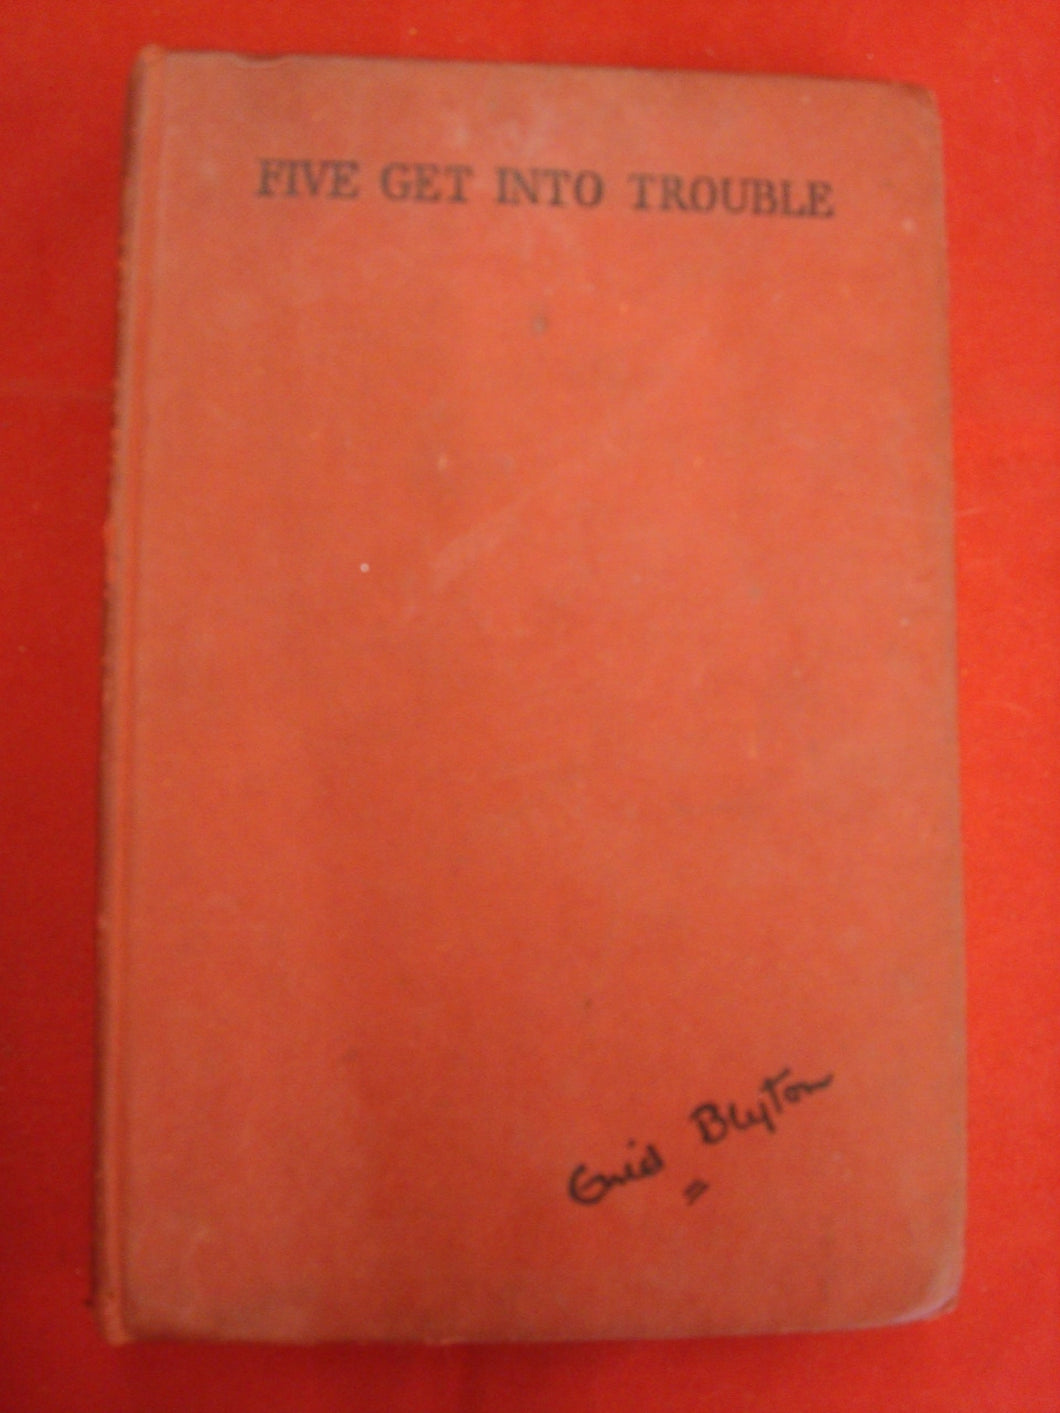 Five Get Into Trouble by Enid Blyton [Hardcover] BLYTON, Enid